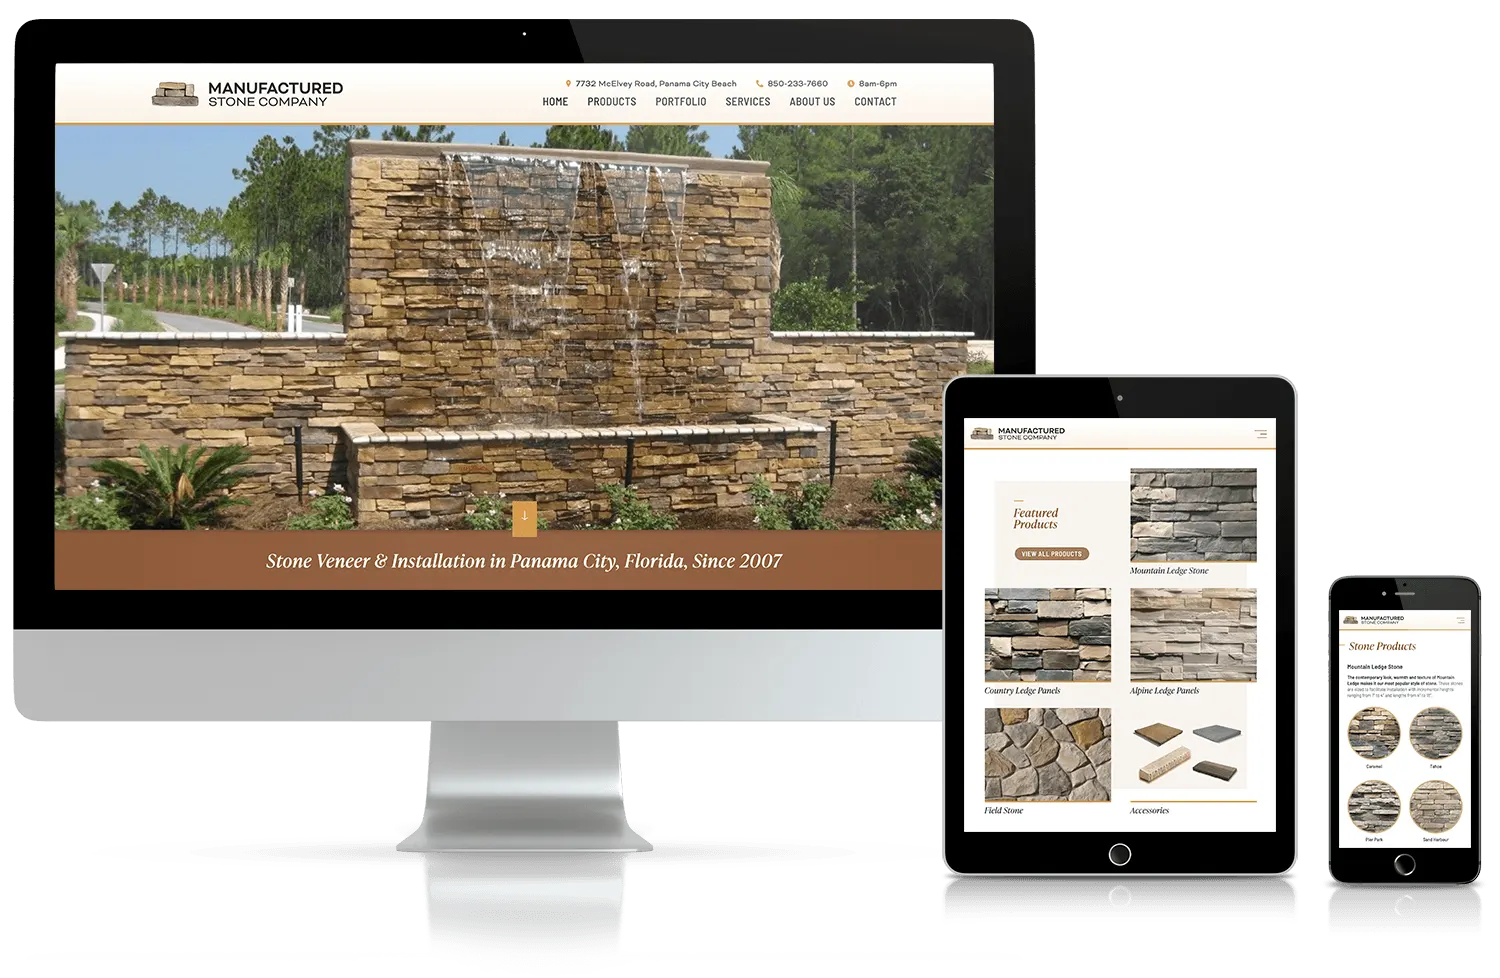 Website design for Manufactured Stone Company